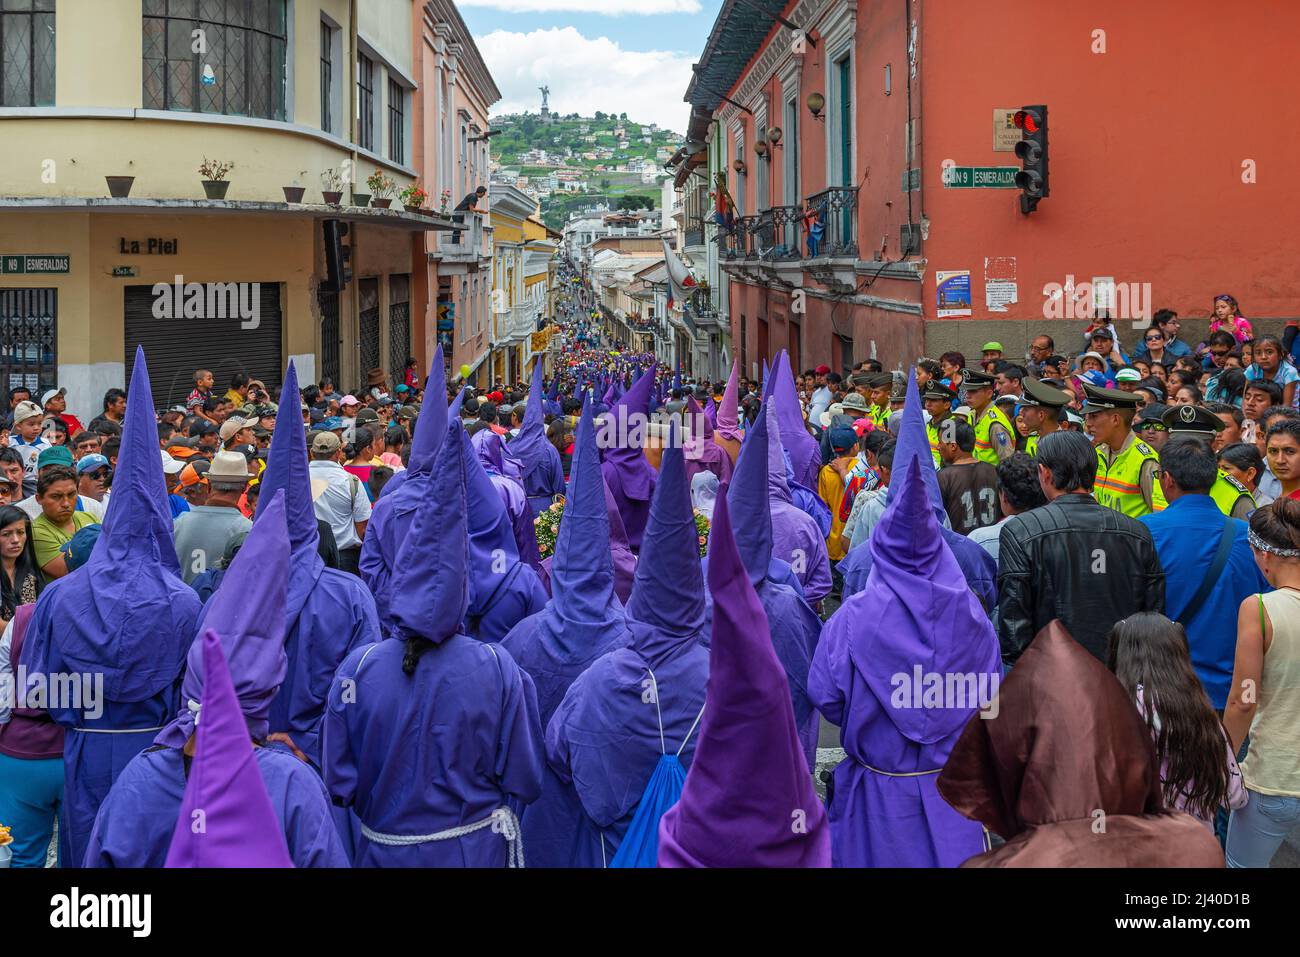 Cucurucho penitents in traditional purple costume with pointy hats during the Good Friday Easter procession in the streets of Quito, Ecuador. Stock Photo